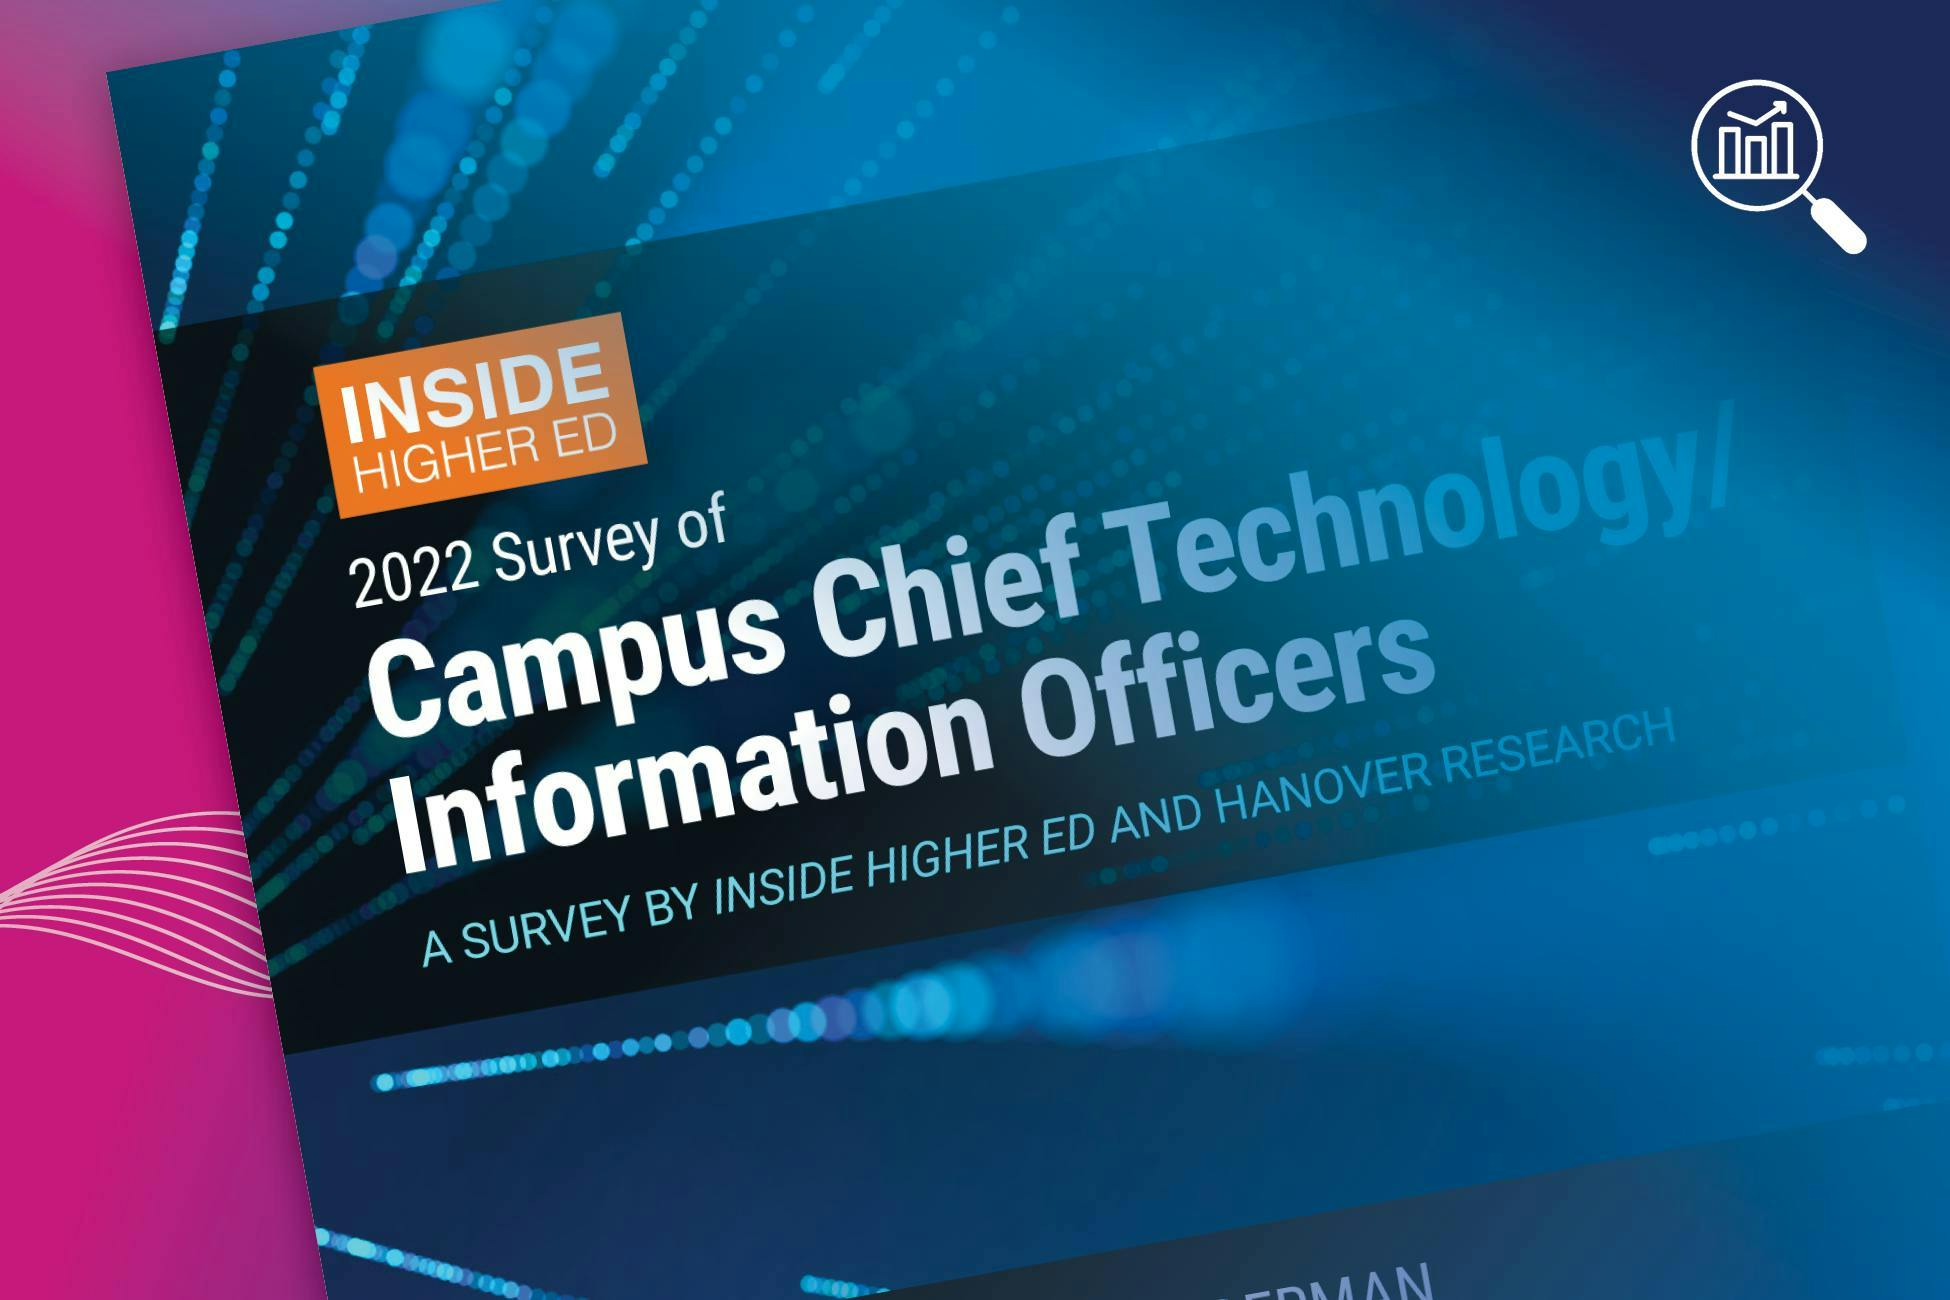 Industry Insight: IHE 2022 Survey of Campus Chief Technology/Information Officers 
